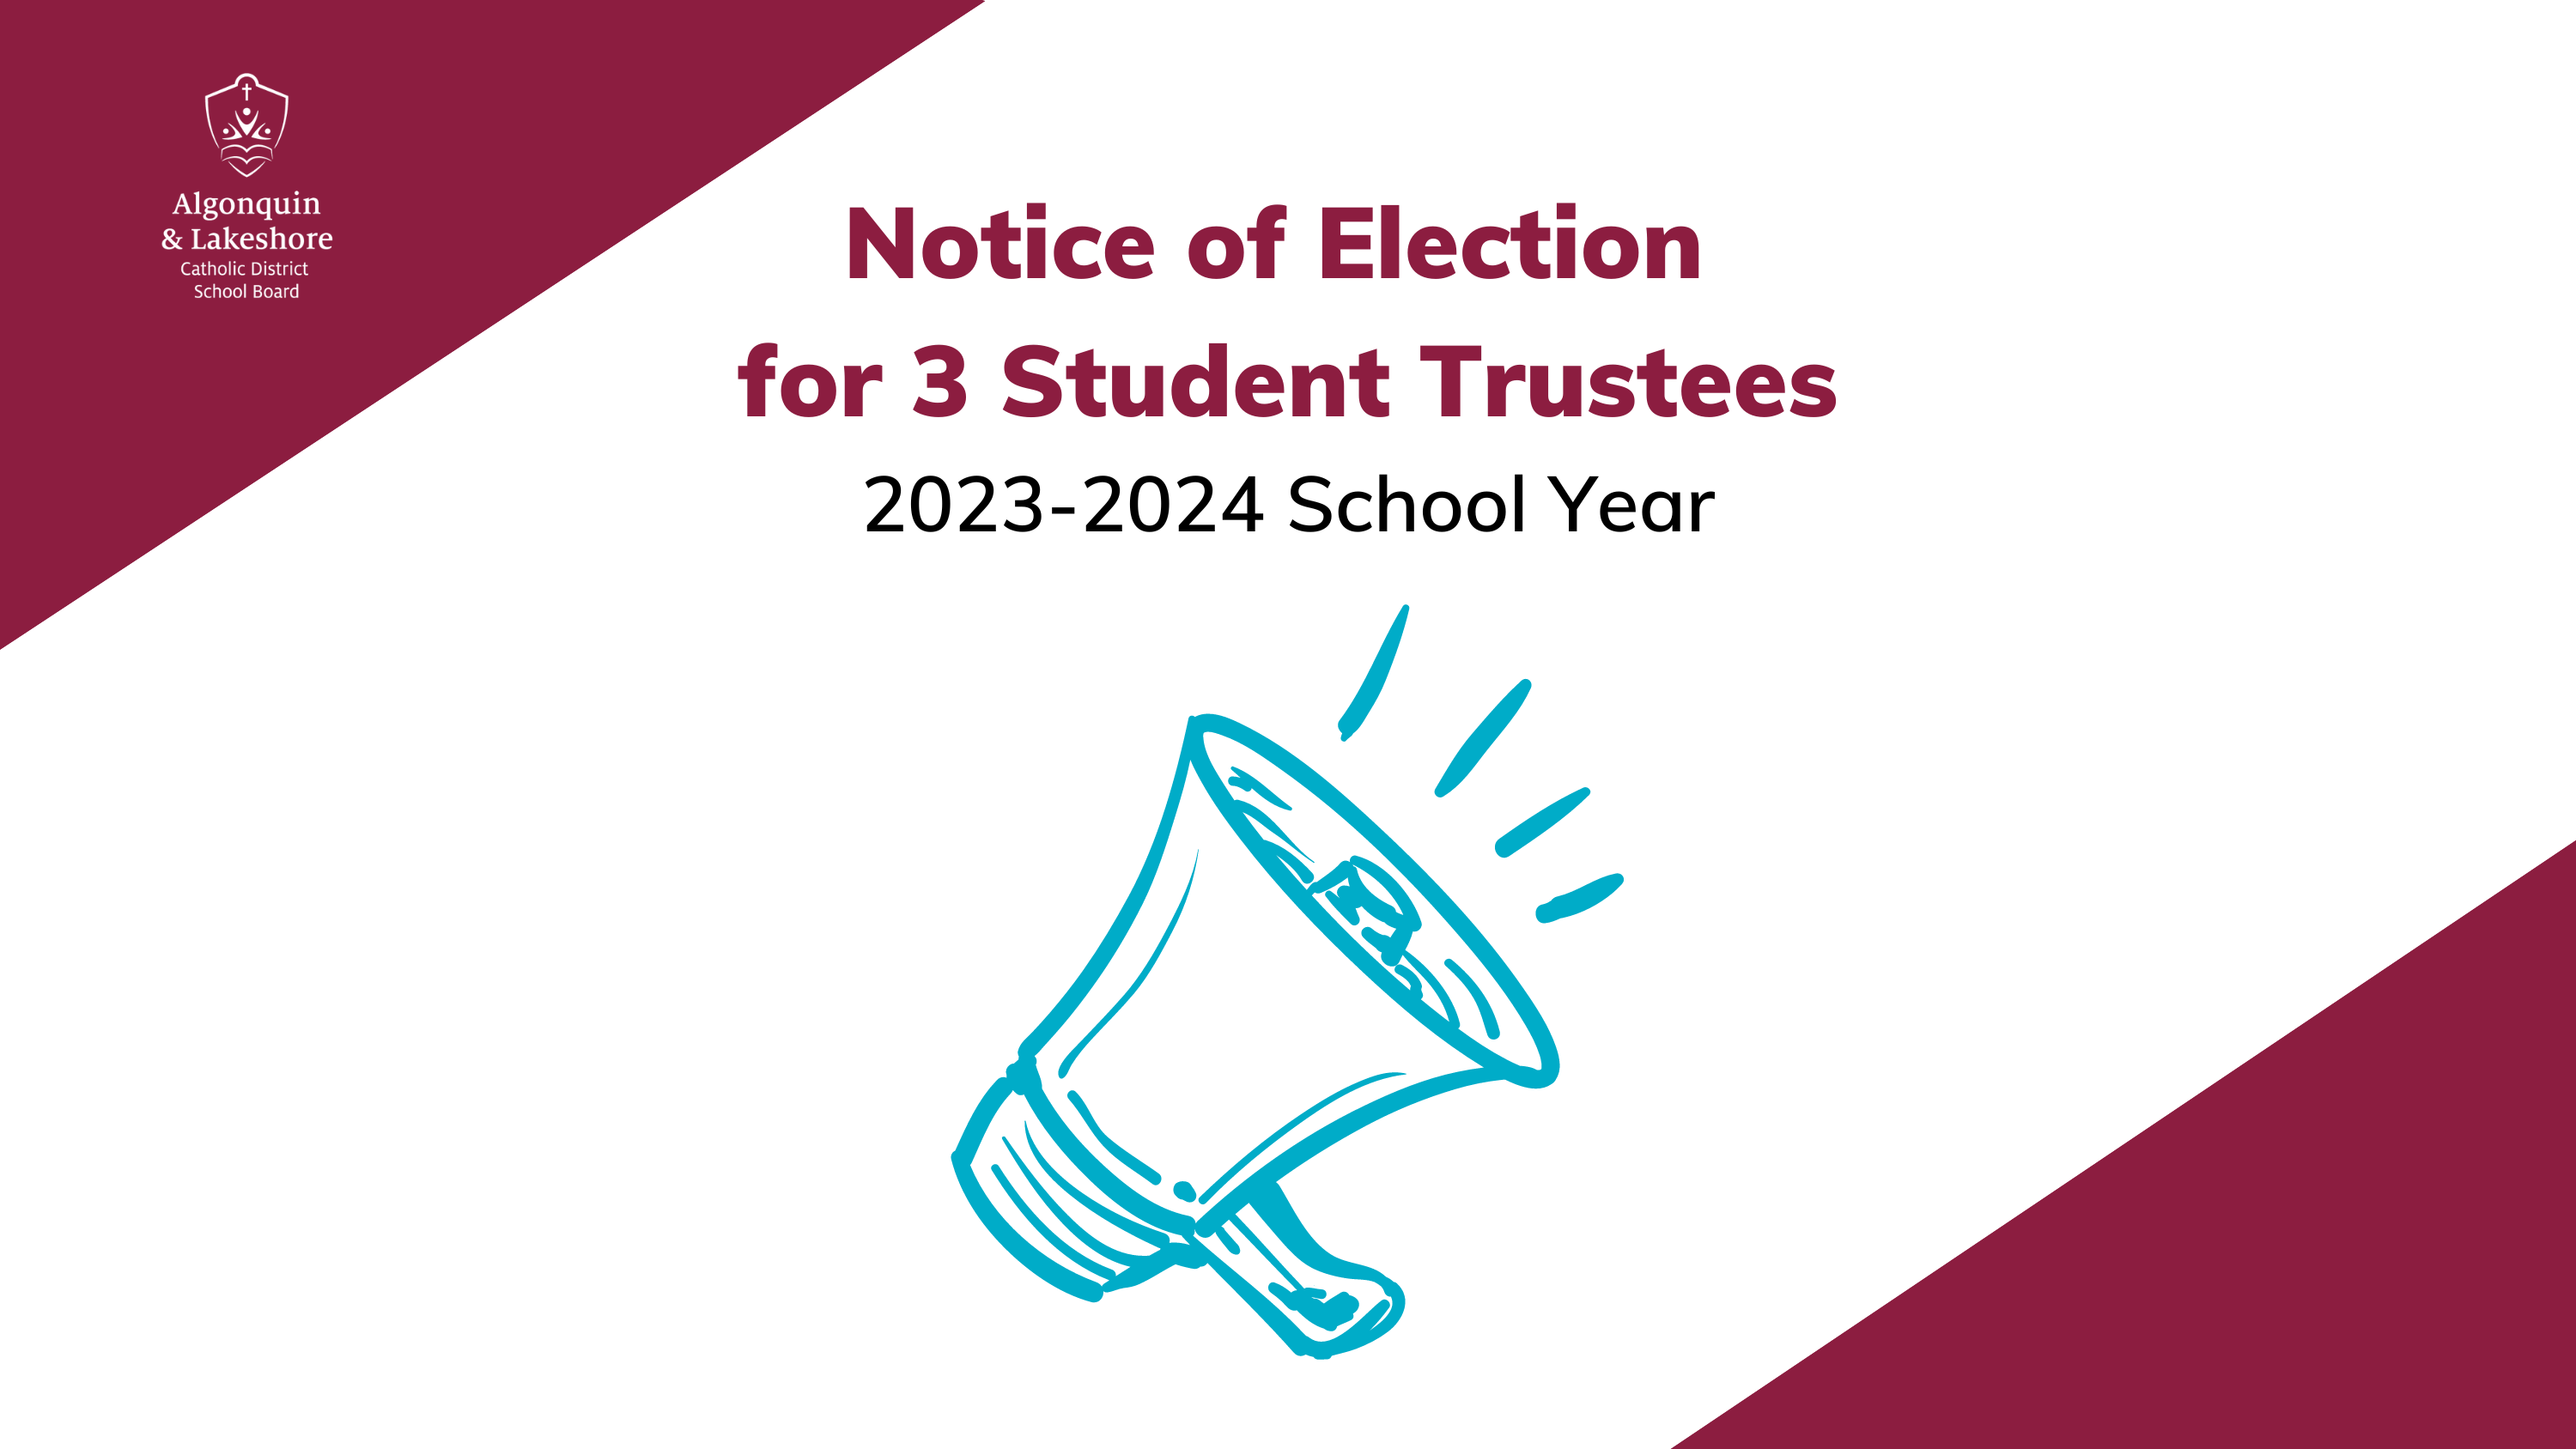 Notice of Election for 3 Student Trustees graphic.